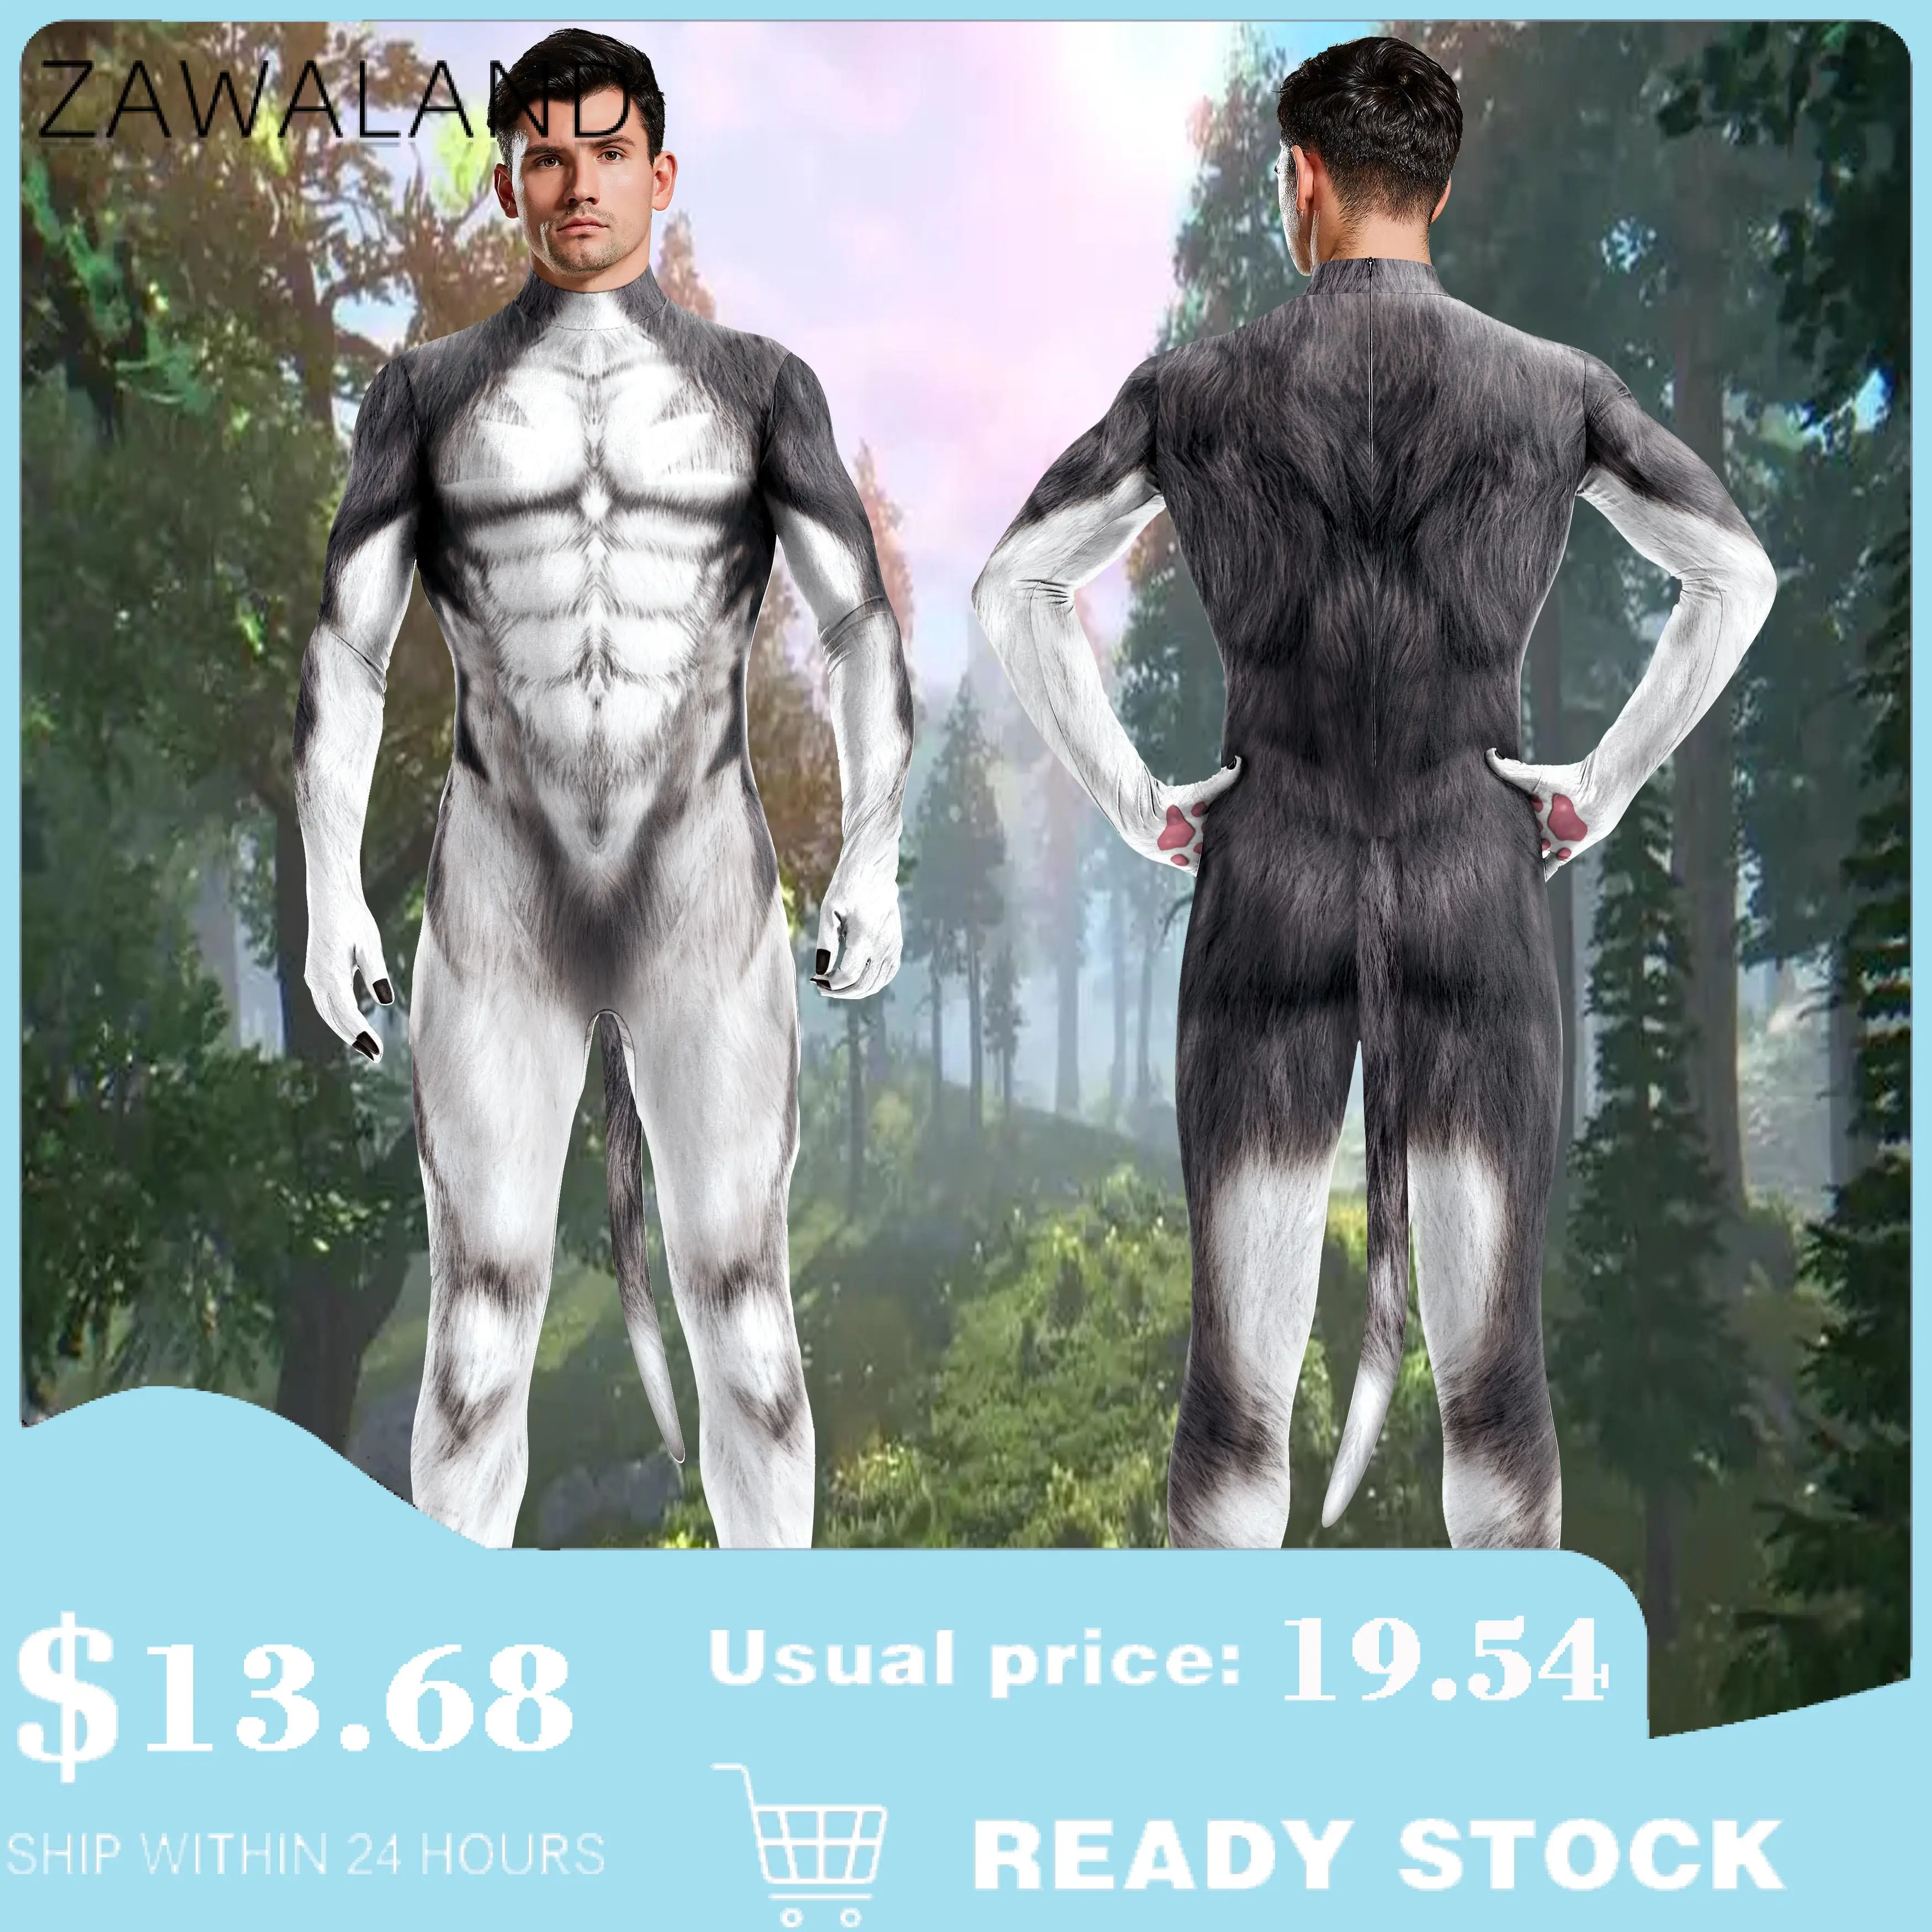 

Zawaland Wolf Bodysuits Unisex Elastic Sexy Catsuit with Tail Halloween Party Jumpsuits Cosplay Costume Open Crotch Zipper